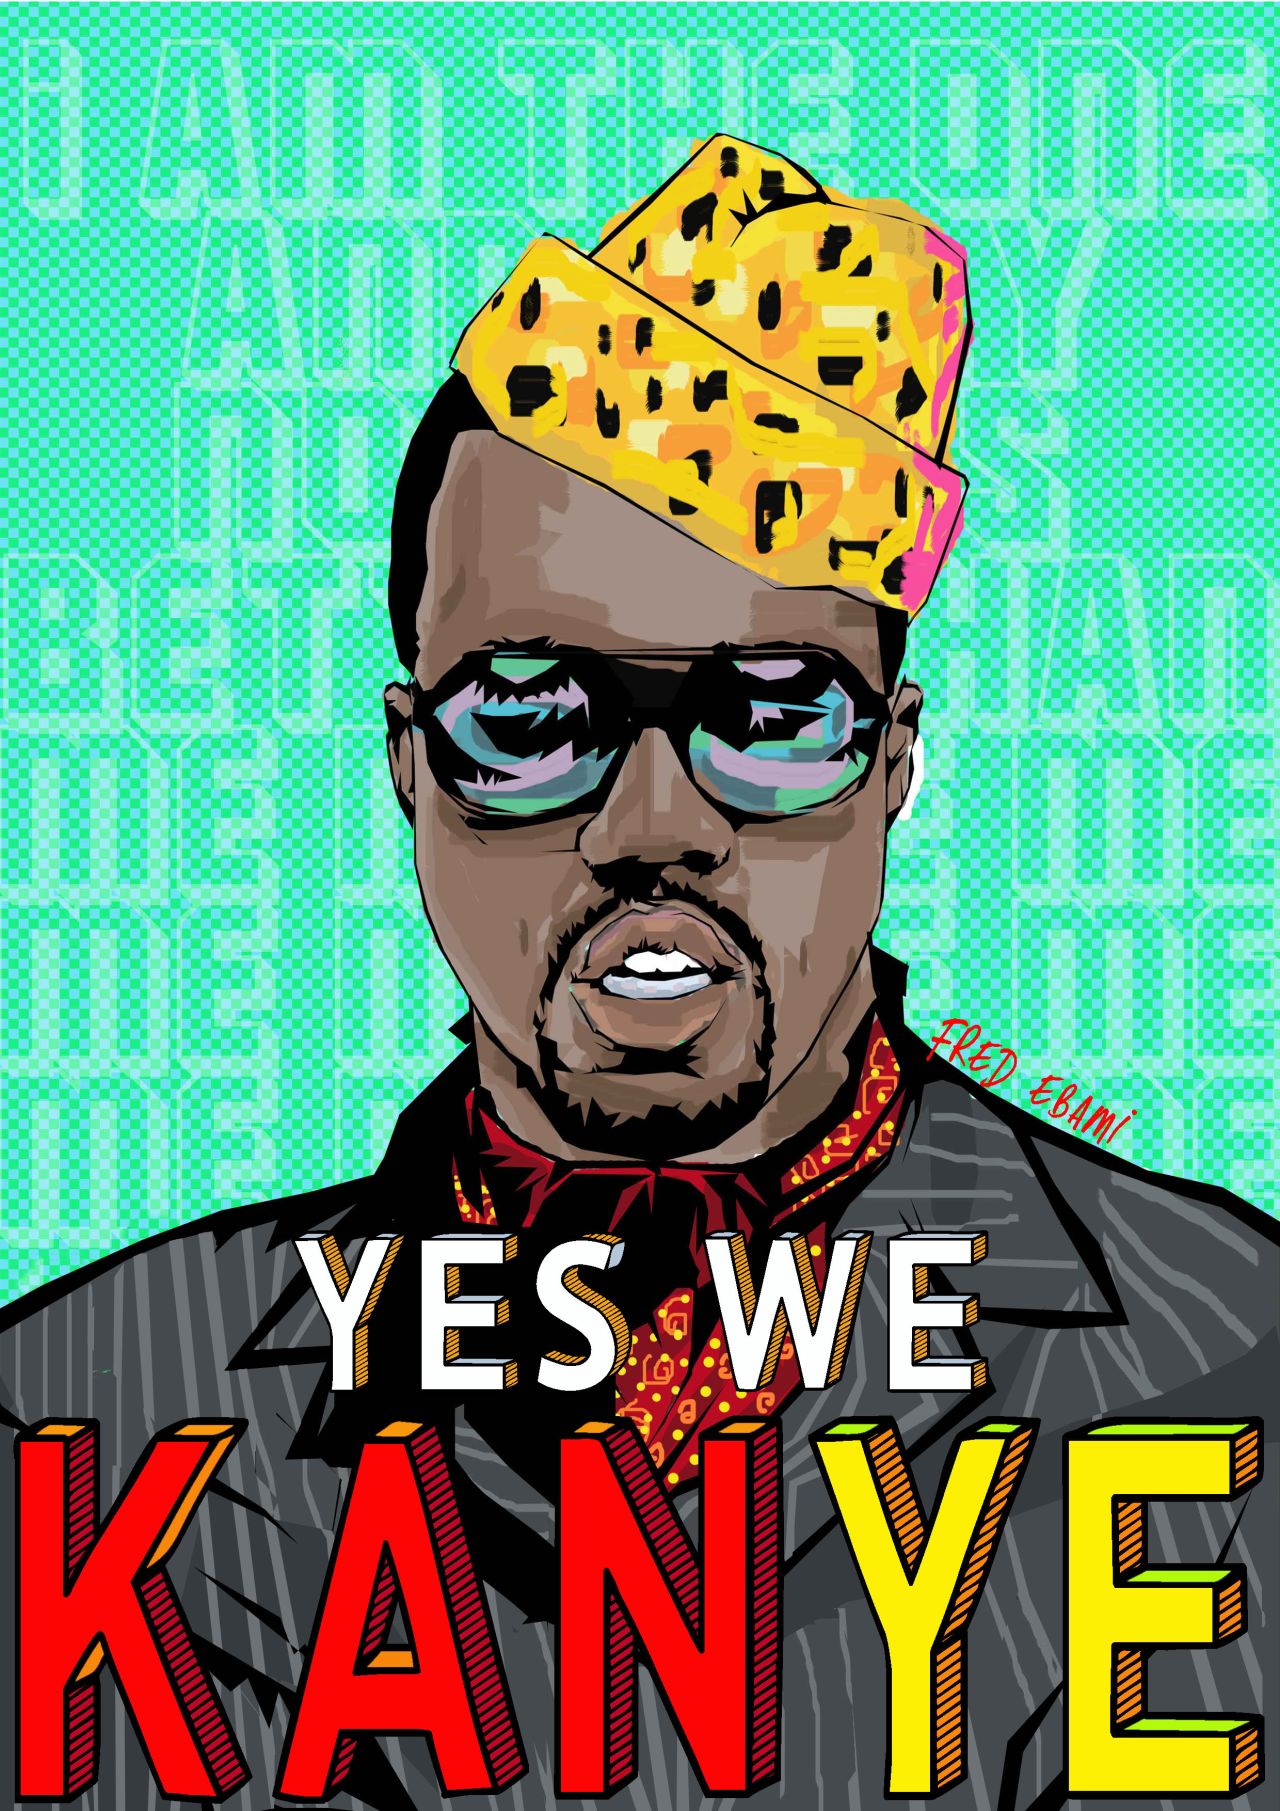 Franco-Cameroonian artist Fred Ebami has coined the phrase "New Pop" to describe his contemporary interpretation of the Pop Art genre. He finds a balance between celebration and satire in his portraits of celebrities, such as this image of American rapper Kanye West dressed as Mobutu Sese Seko, former leader of Zaire (now the Democratic Republic of the Congo). Yes we KANye, 2012.